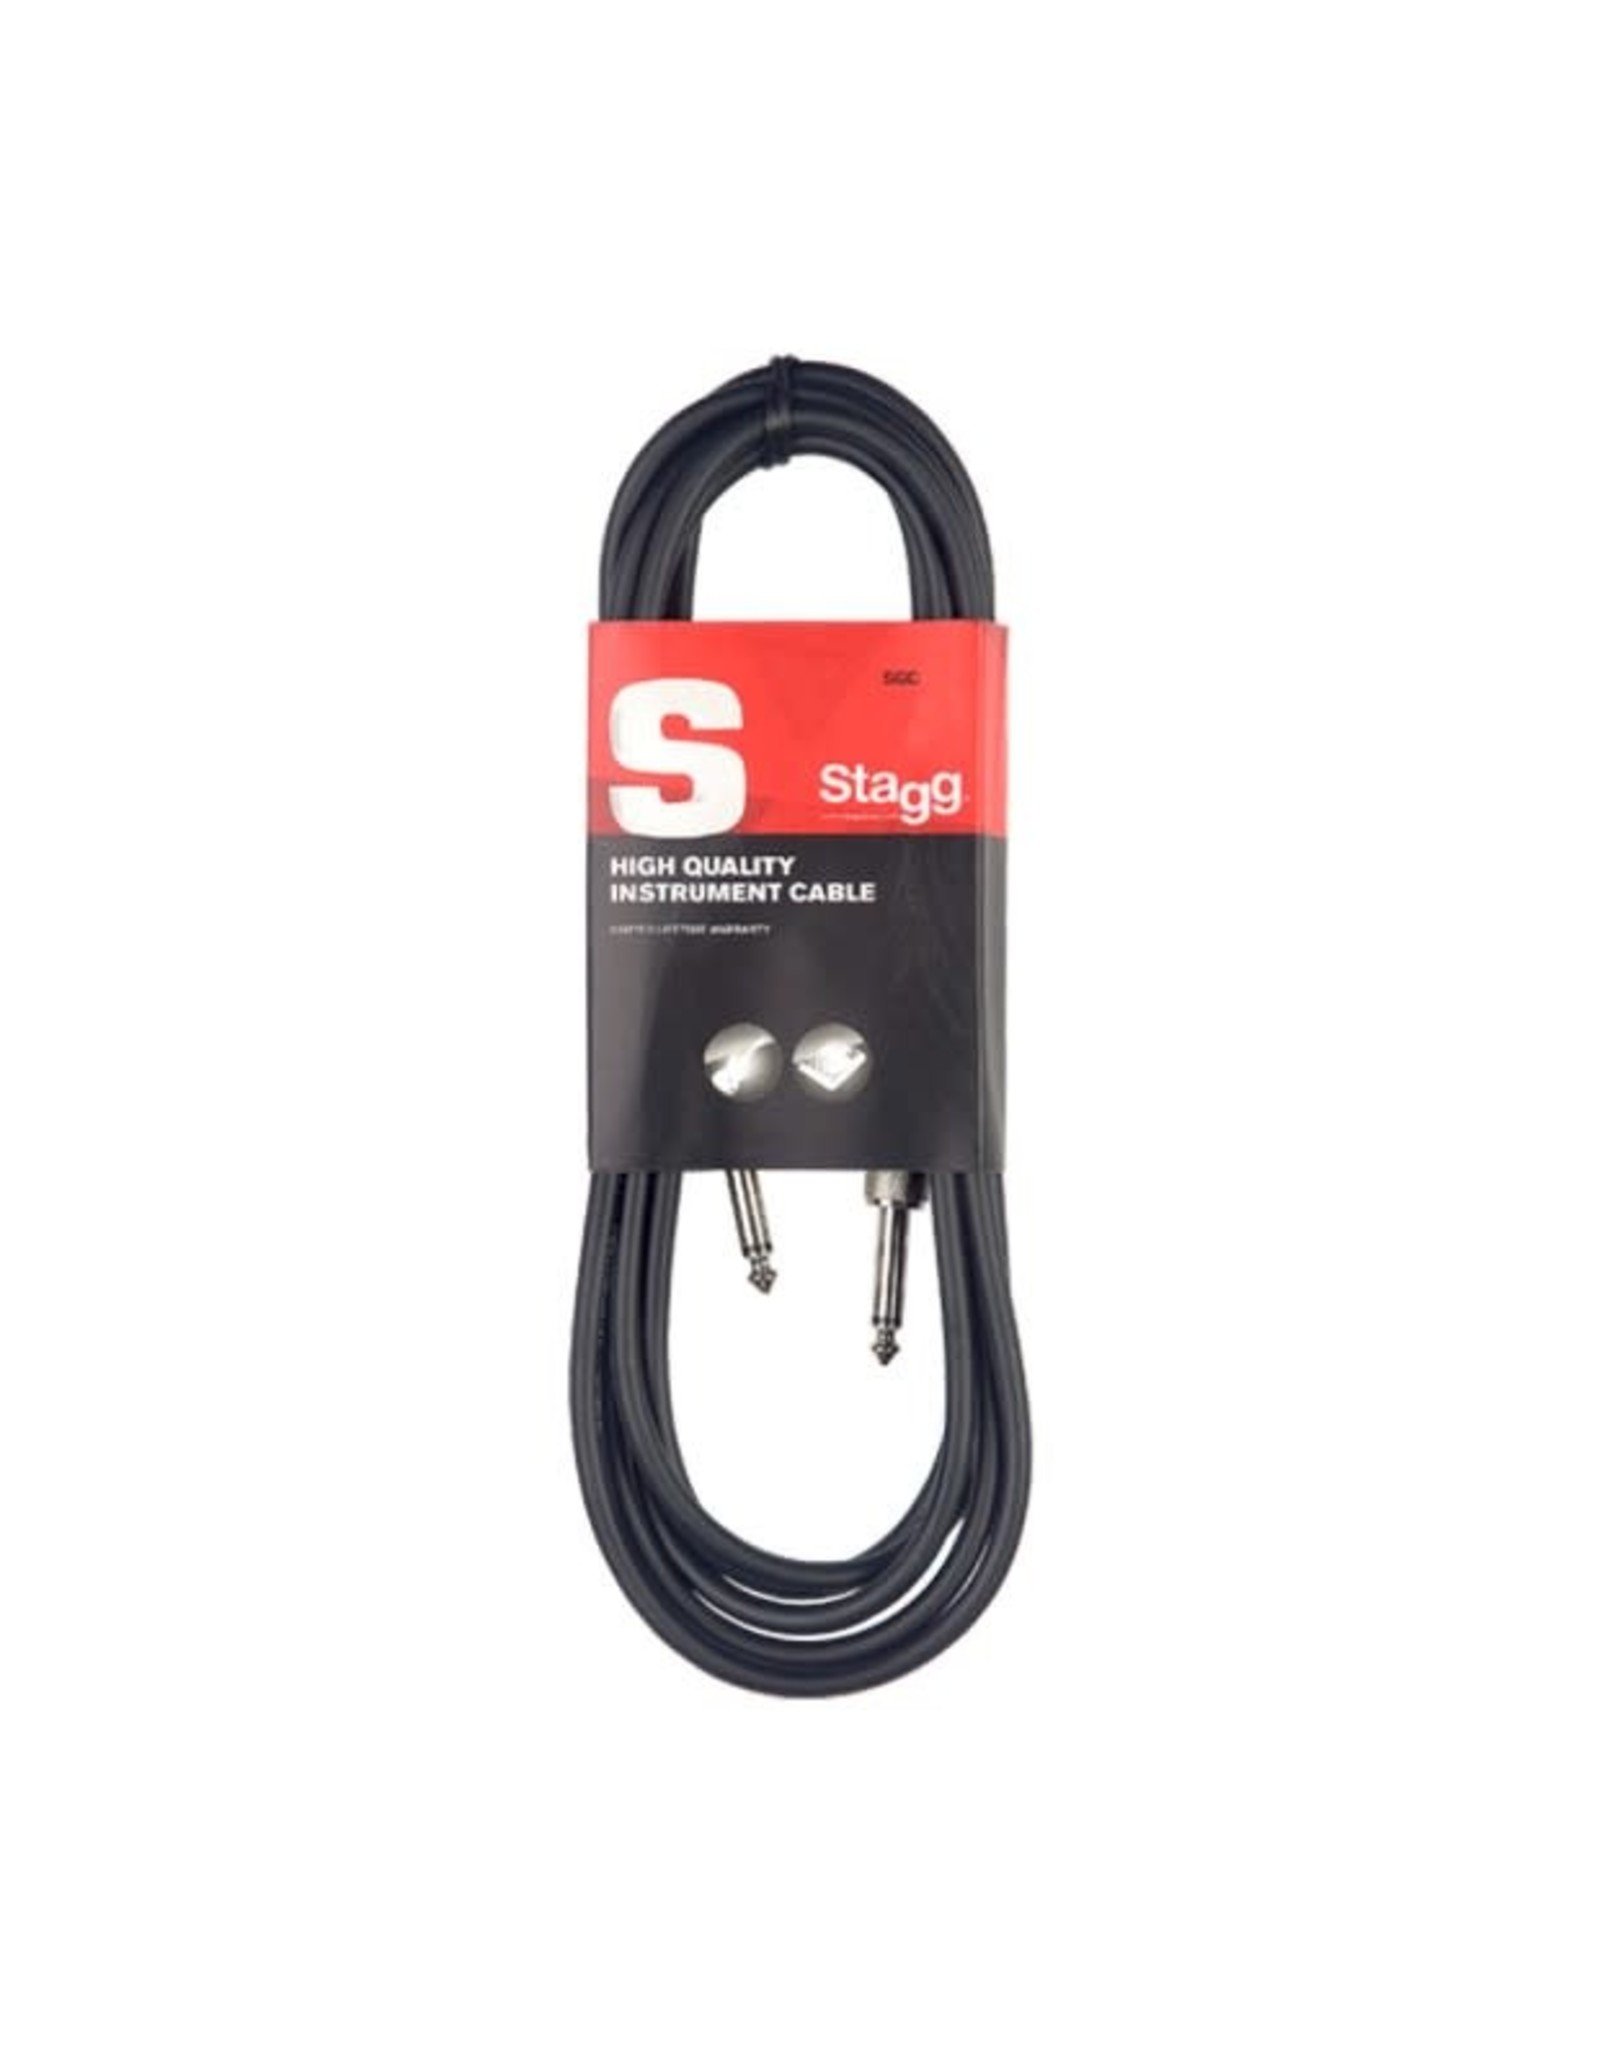 Stagg Stagg S-Series Instrument Cable 5'